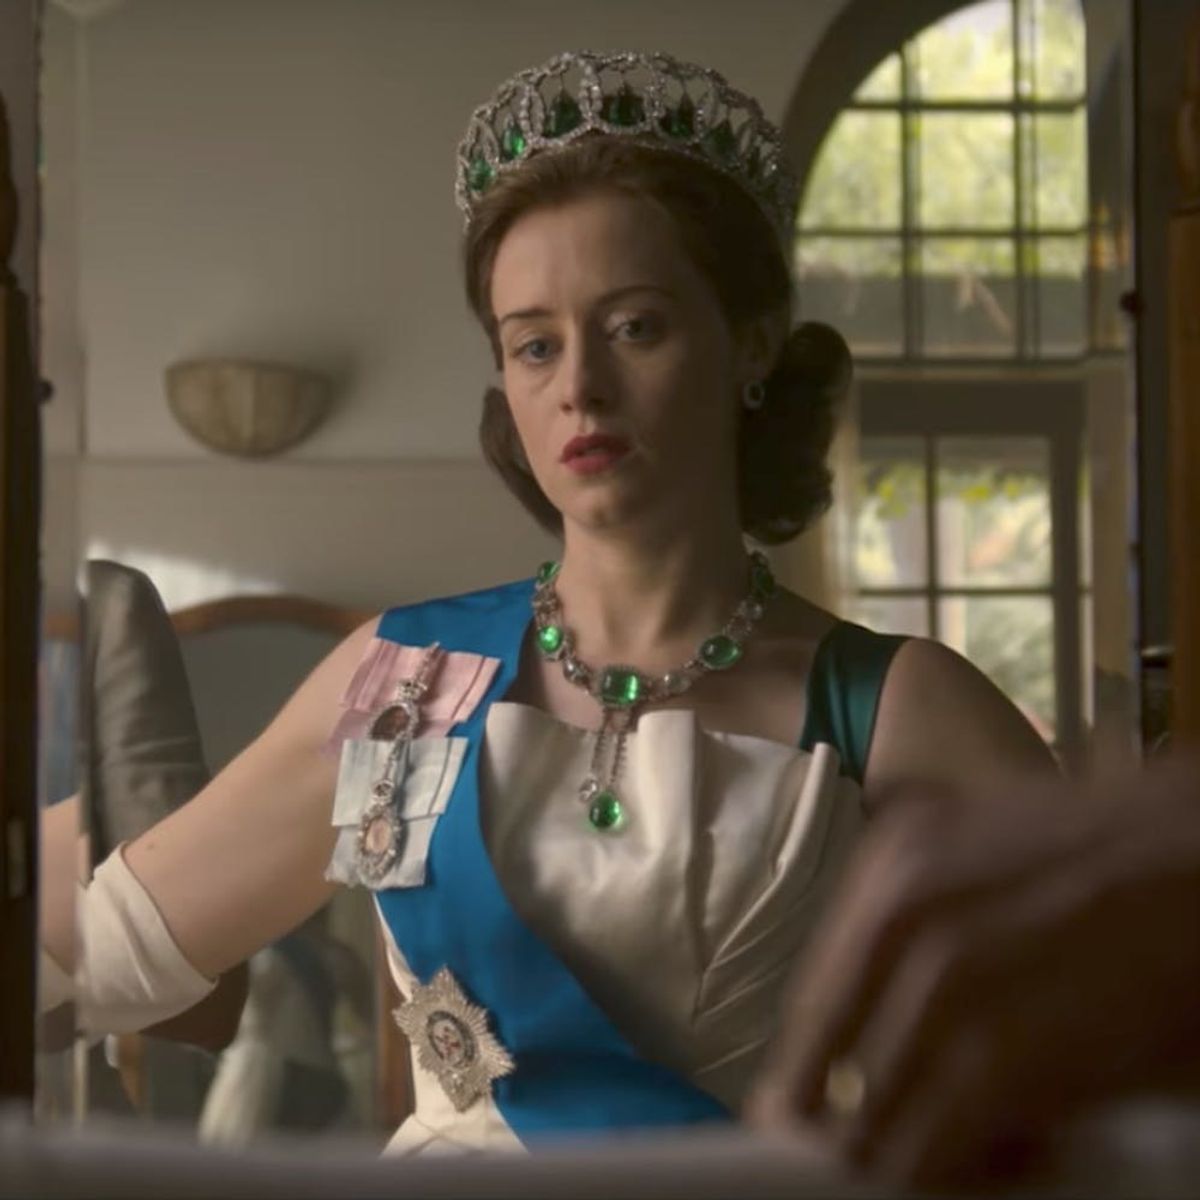 Netflix’s The Crown Season 2 Trailer Teases Infidelity, Power, and Lots of Royal Drama